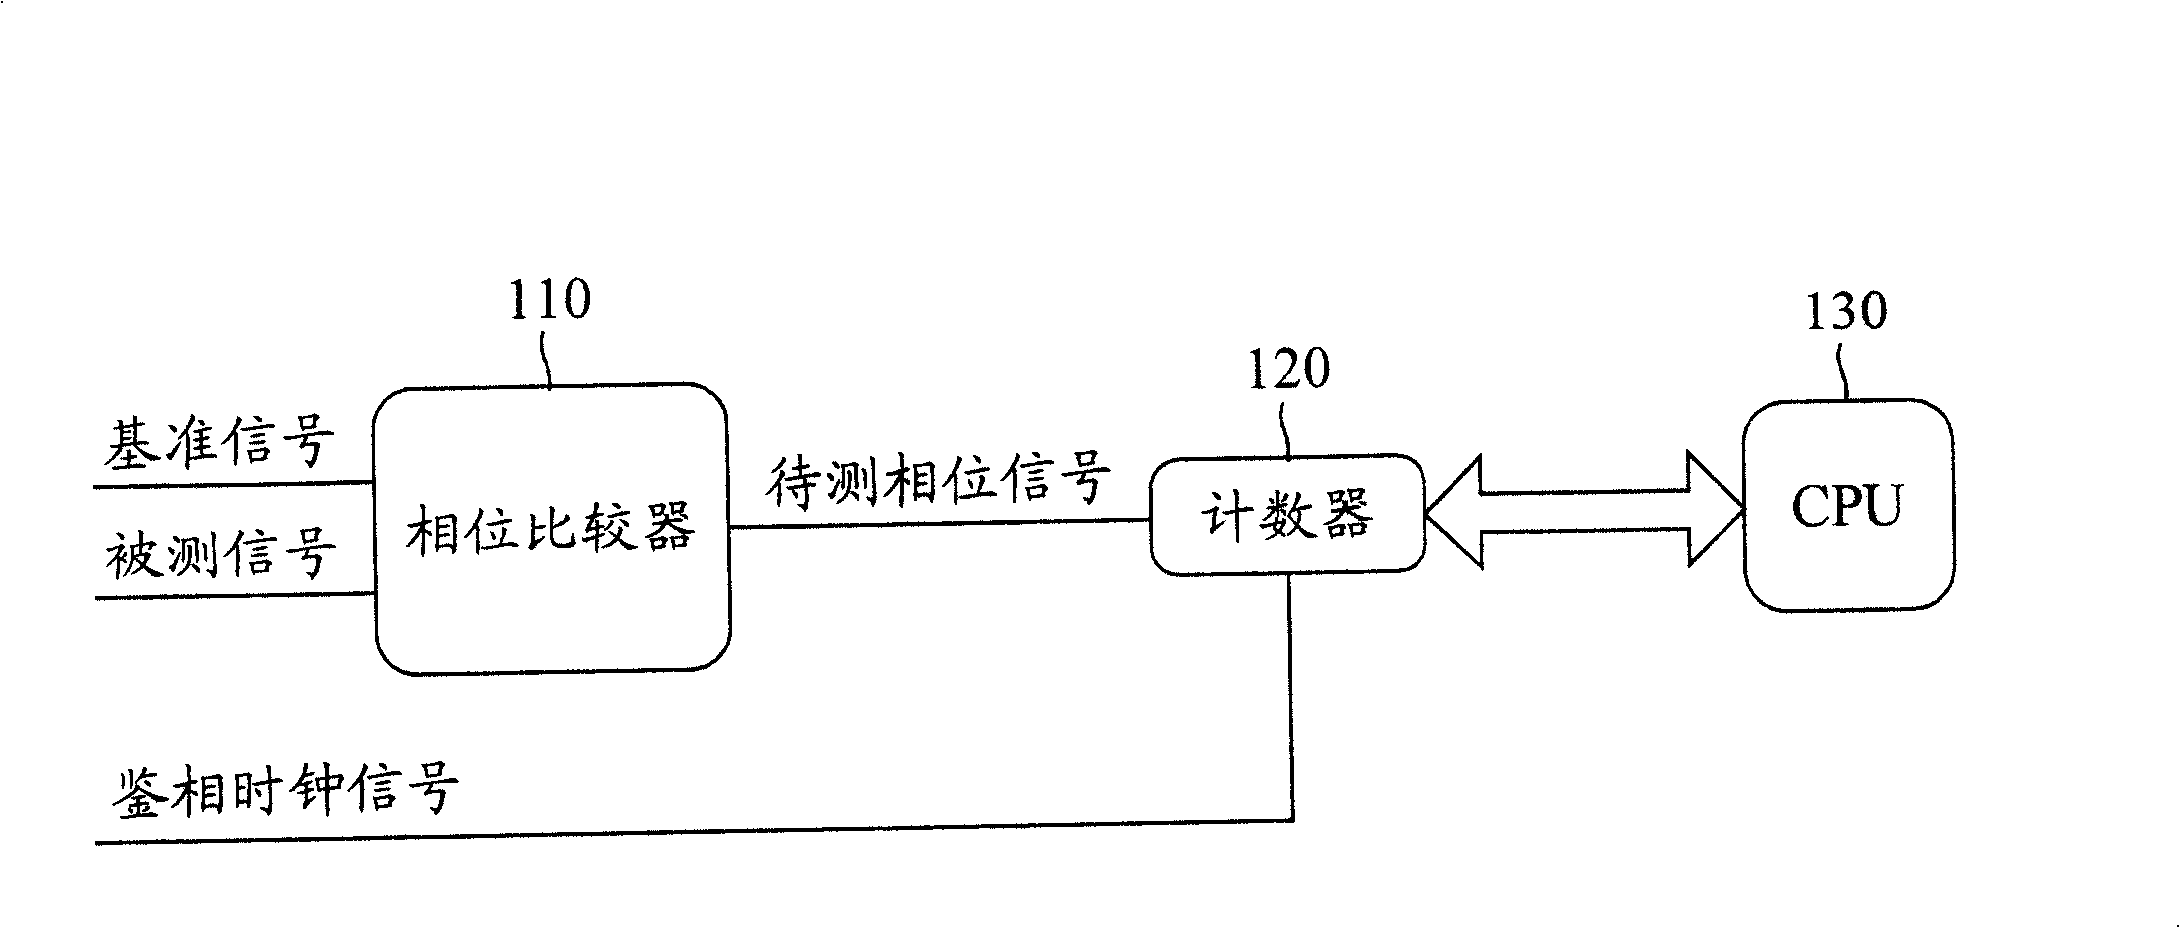 Clock phase detecting device and method